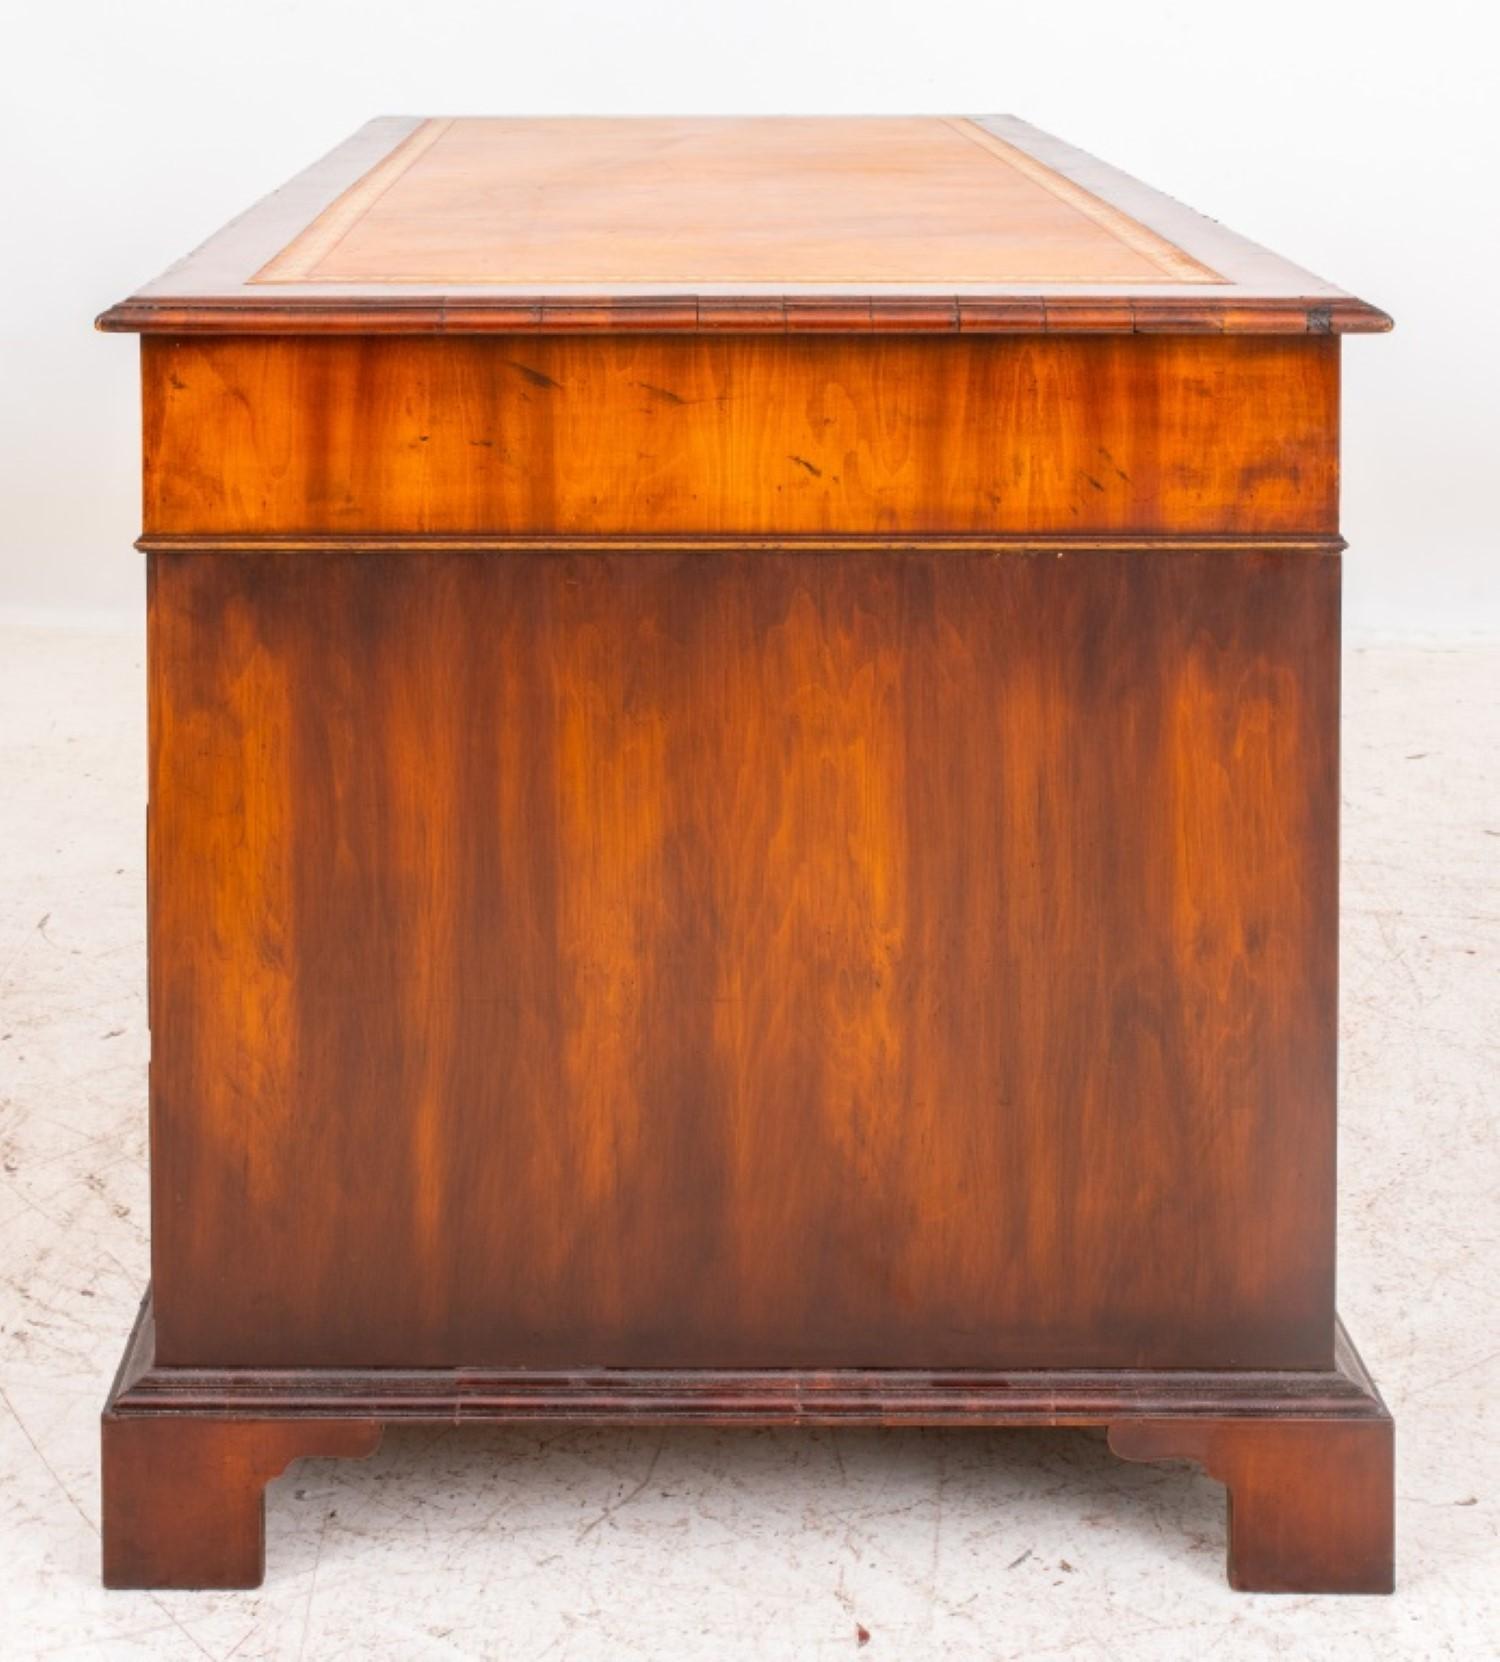 George III style mahogany veneered desk, rectangular with three short drawers above two pedestals, each with three drawers on plinths with bracket feet.

30 inches in height, 65 inches in width, and 30 inches in depth.